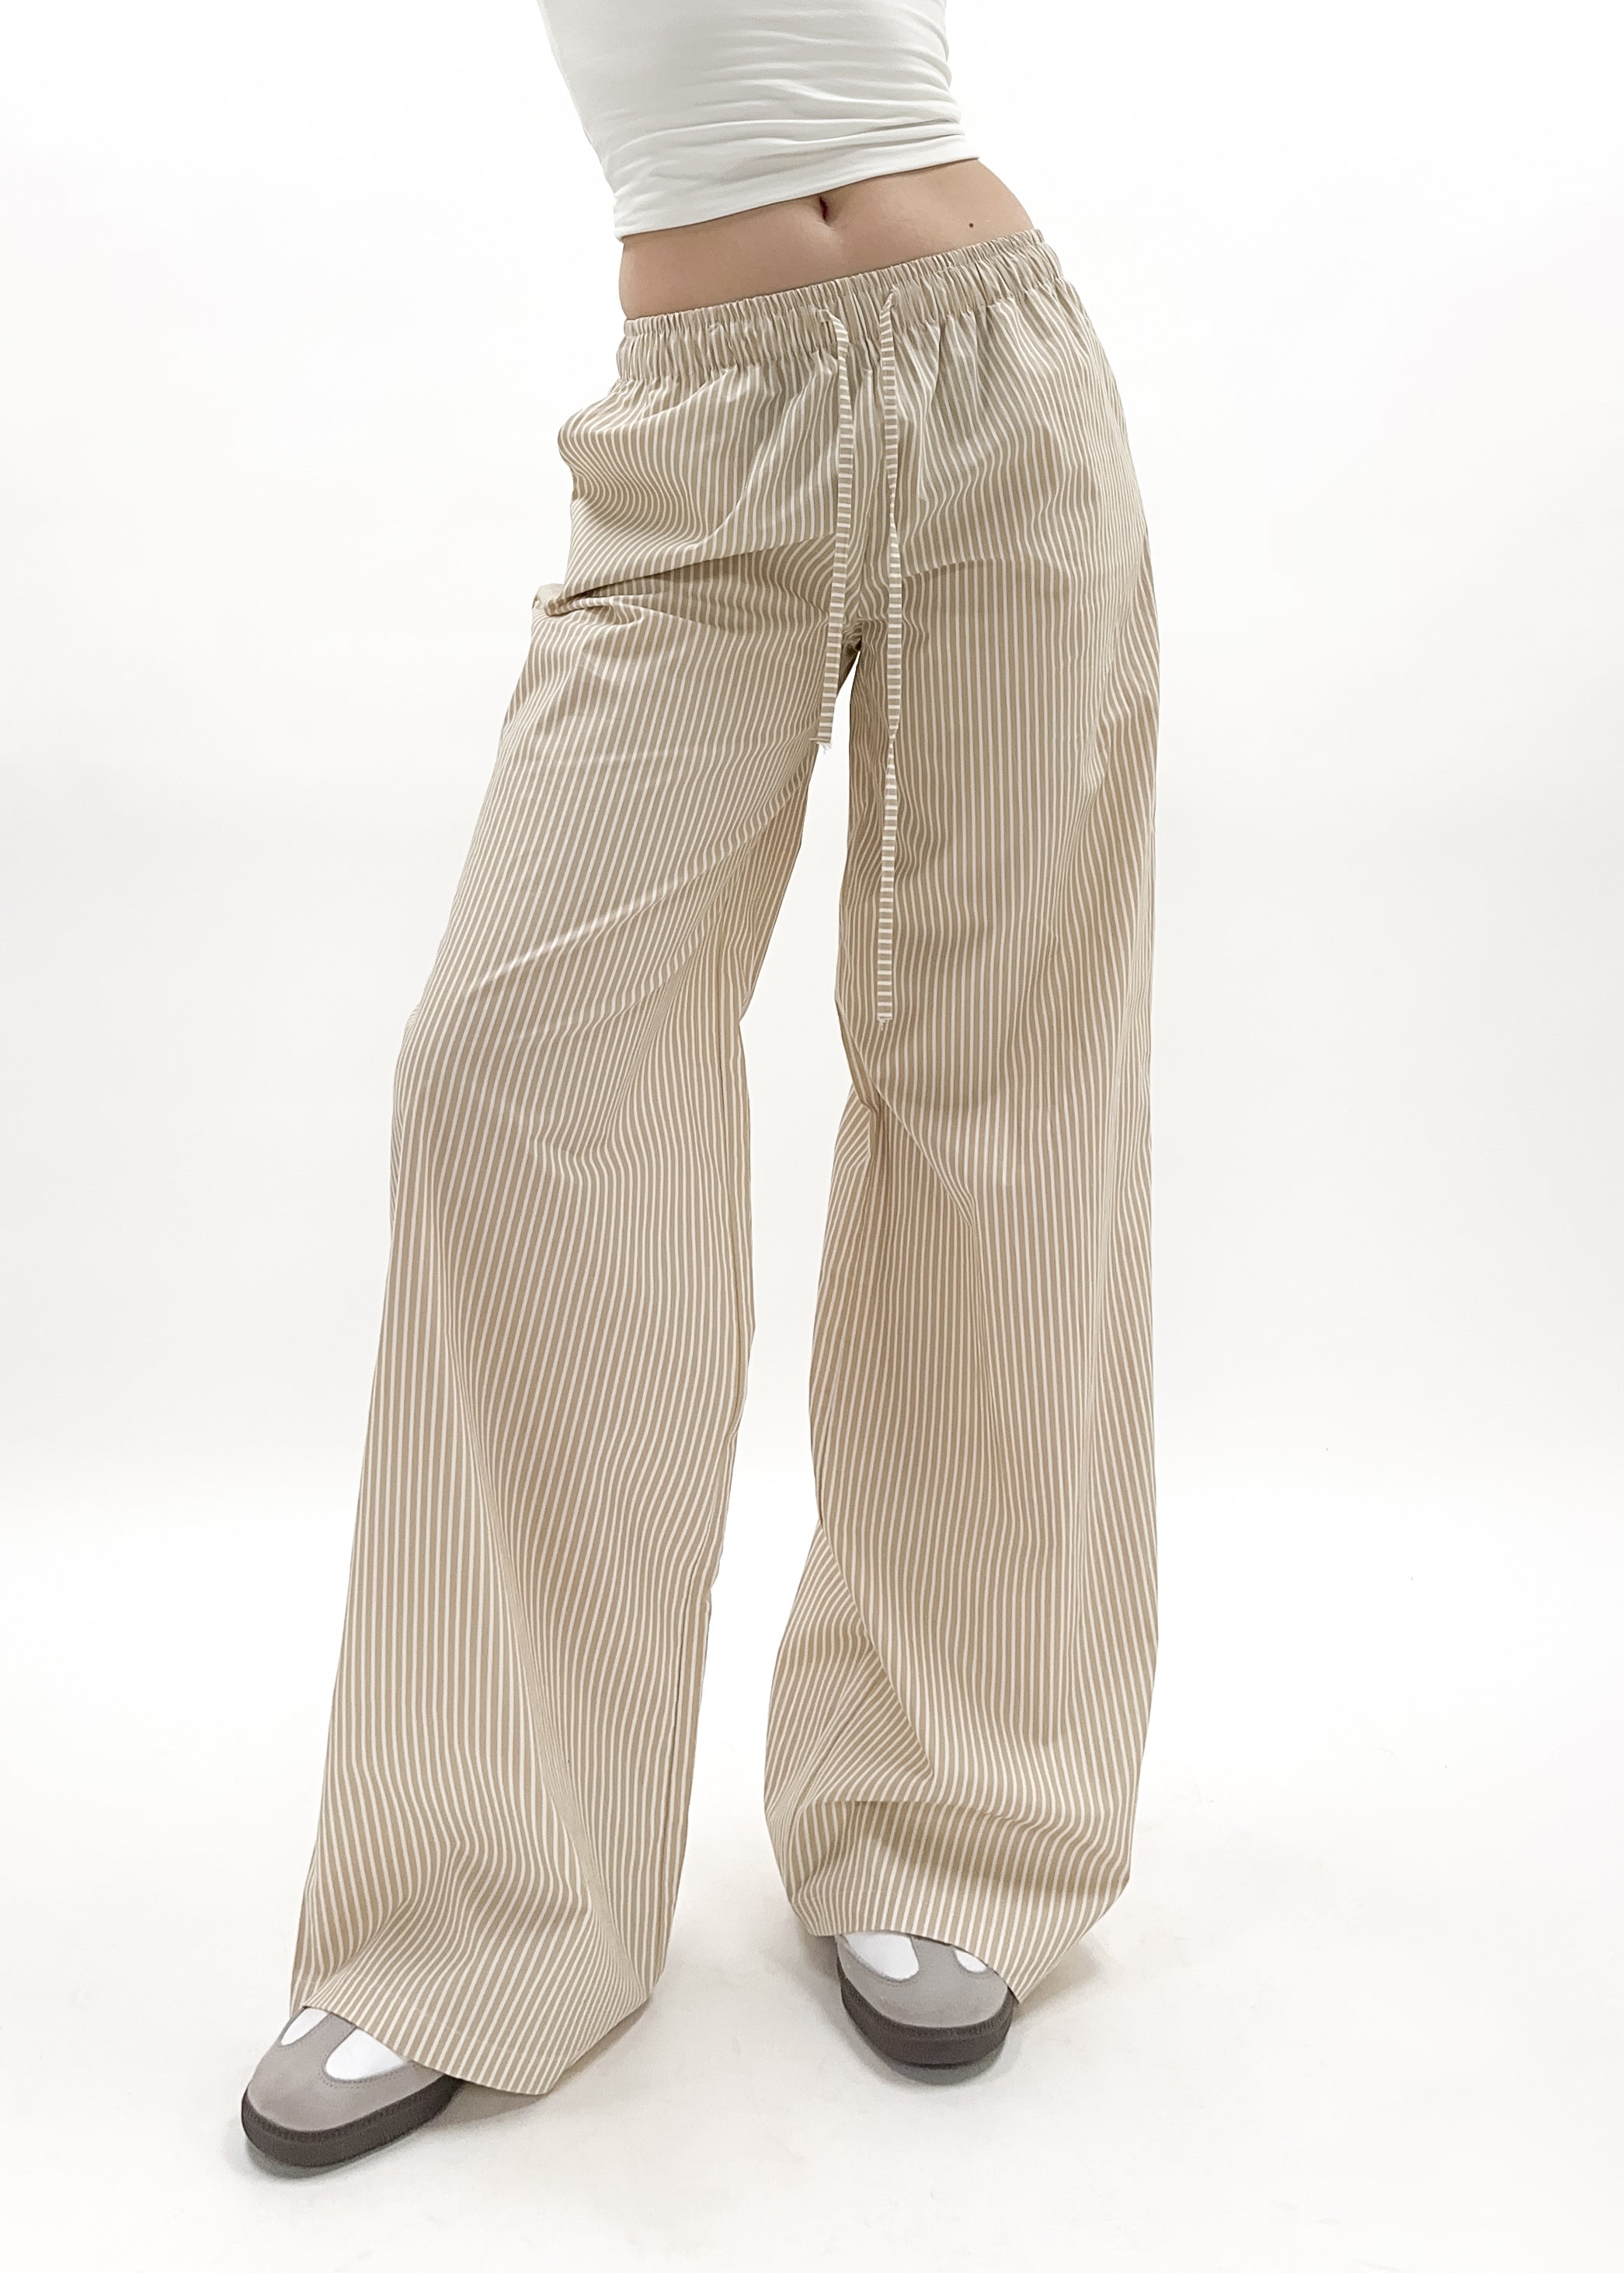 Cotton pants striped (TALL) beige/white